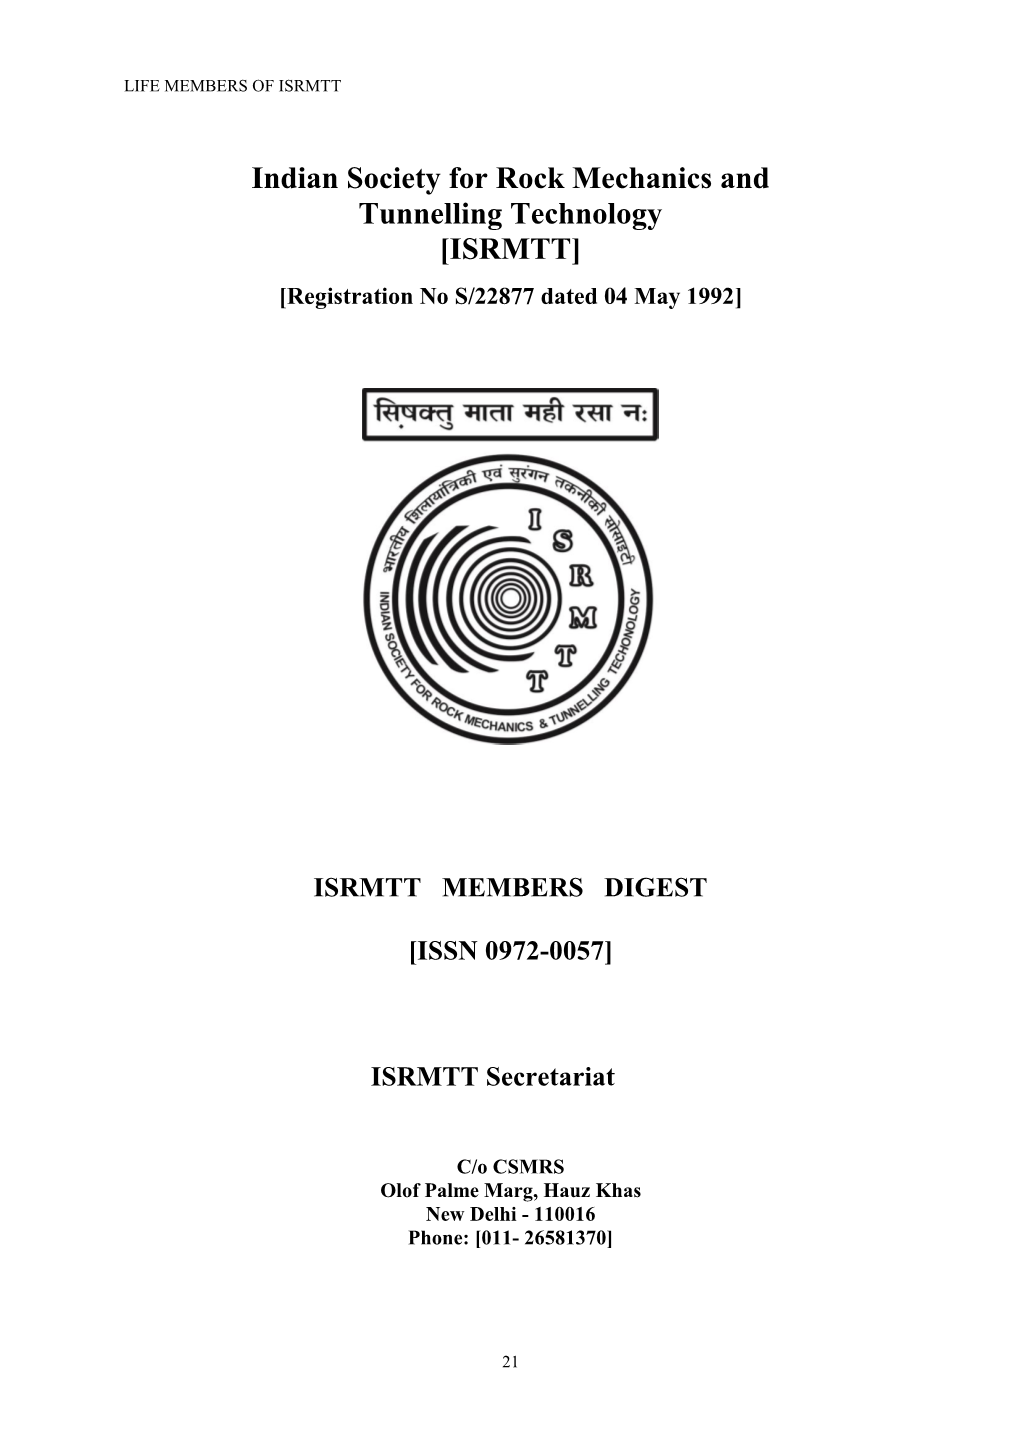 Indian Society for Rock Mechanics and Tunnelling Technology [ISRMTT]